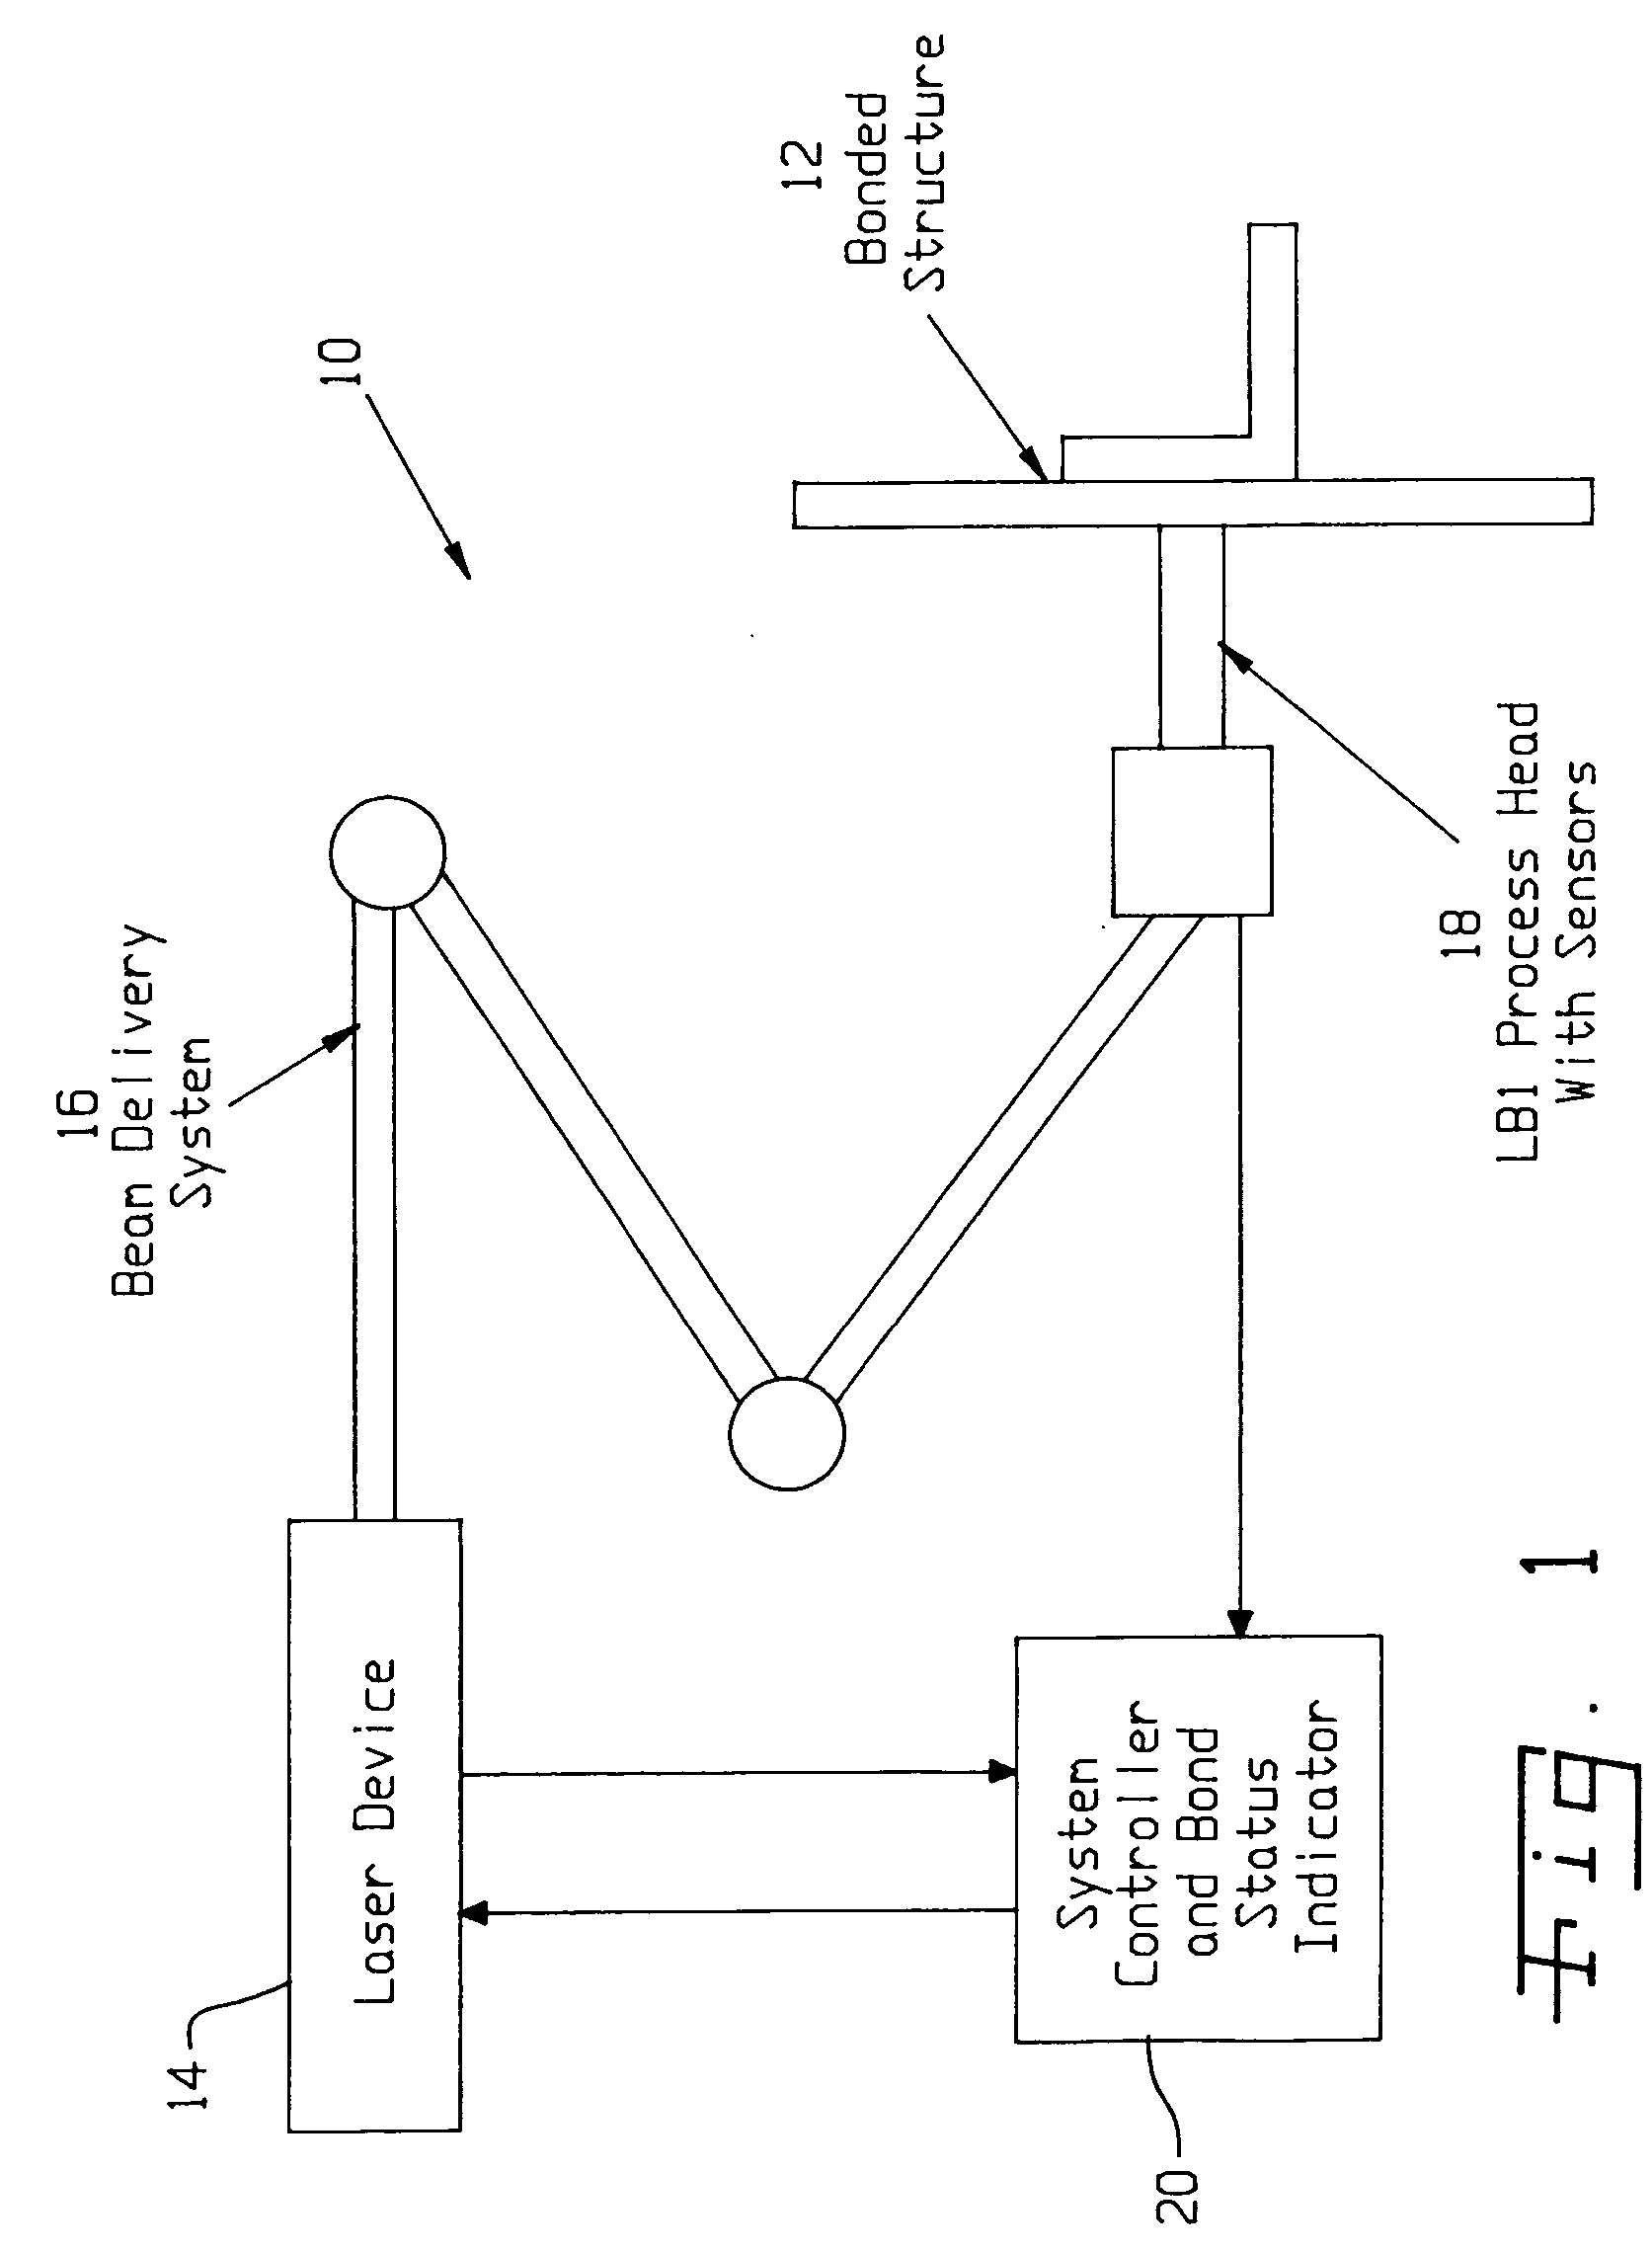 Laser system and method for non-destructive bond detection and evaluation